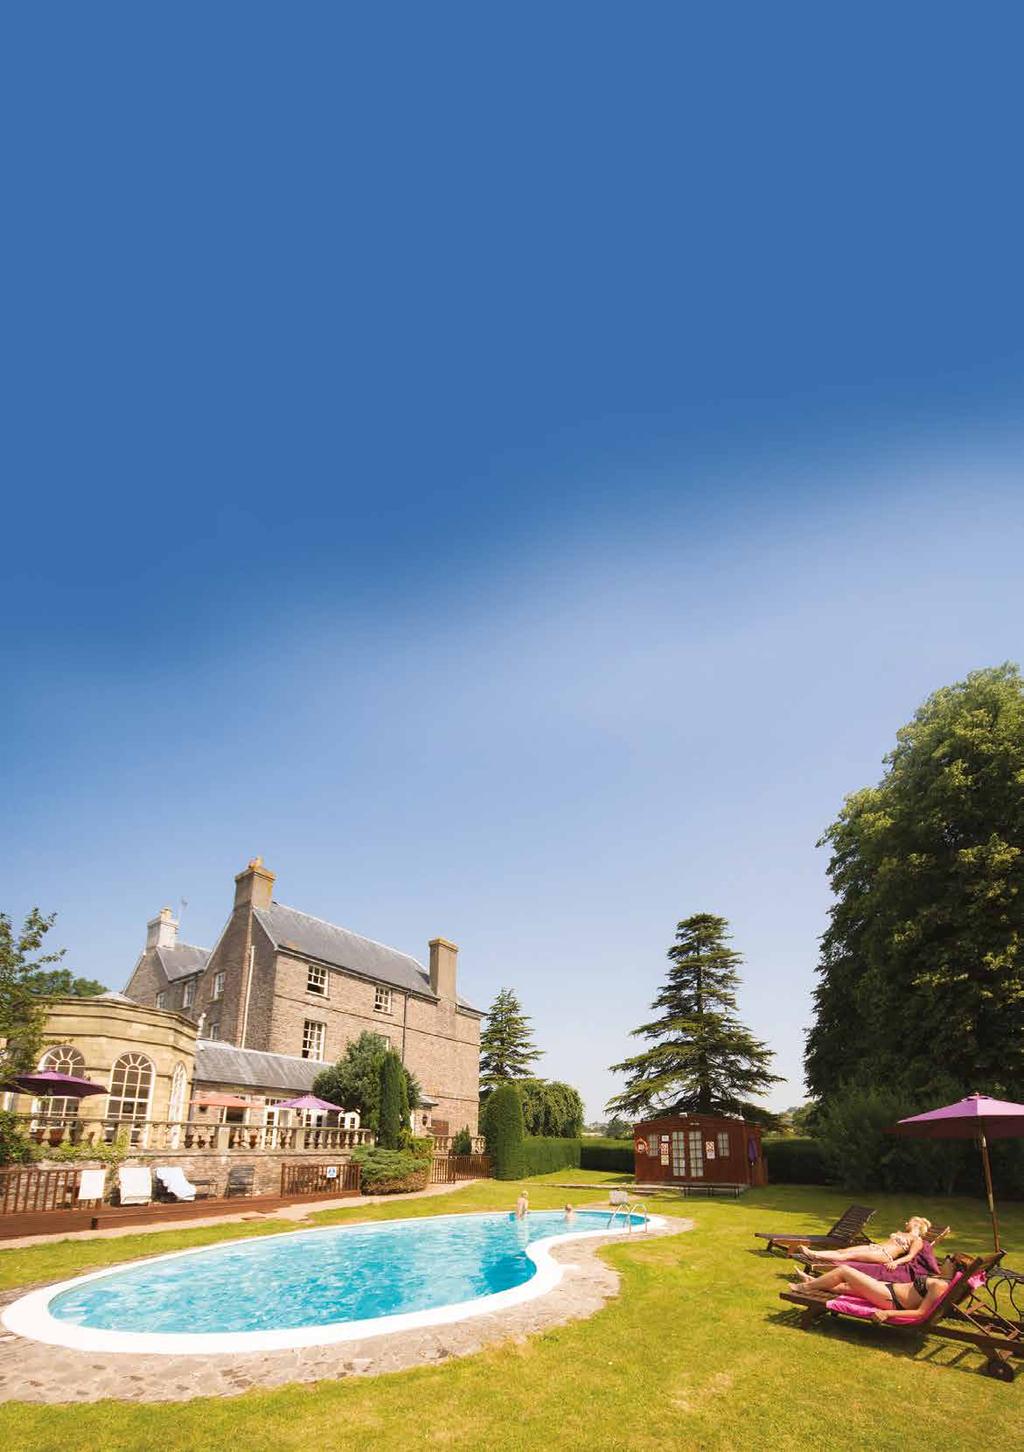 Peterstone Court Spa Peterstone Court Spa is nestled in a prime location in the Brecon Beacons.